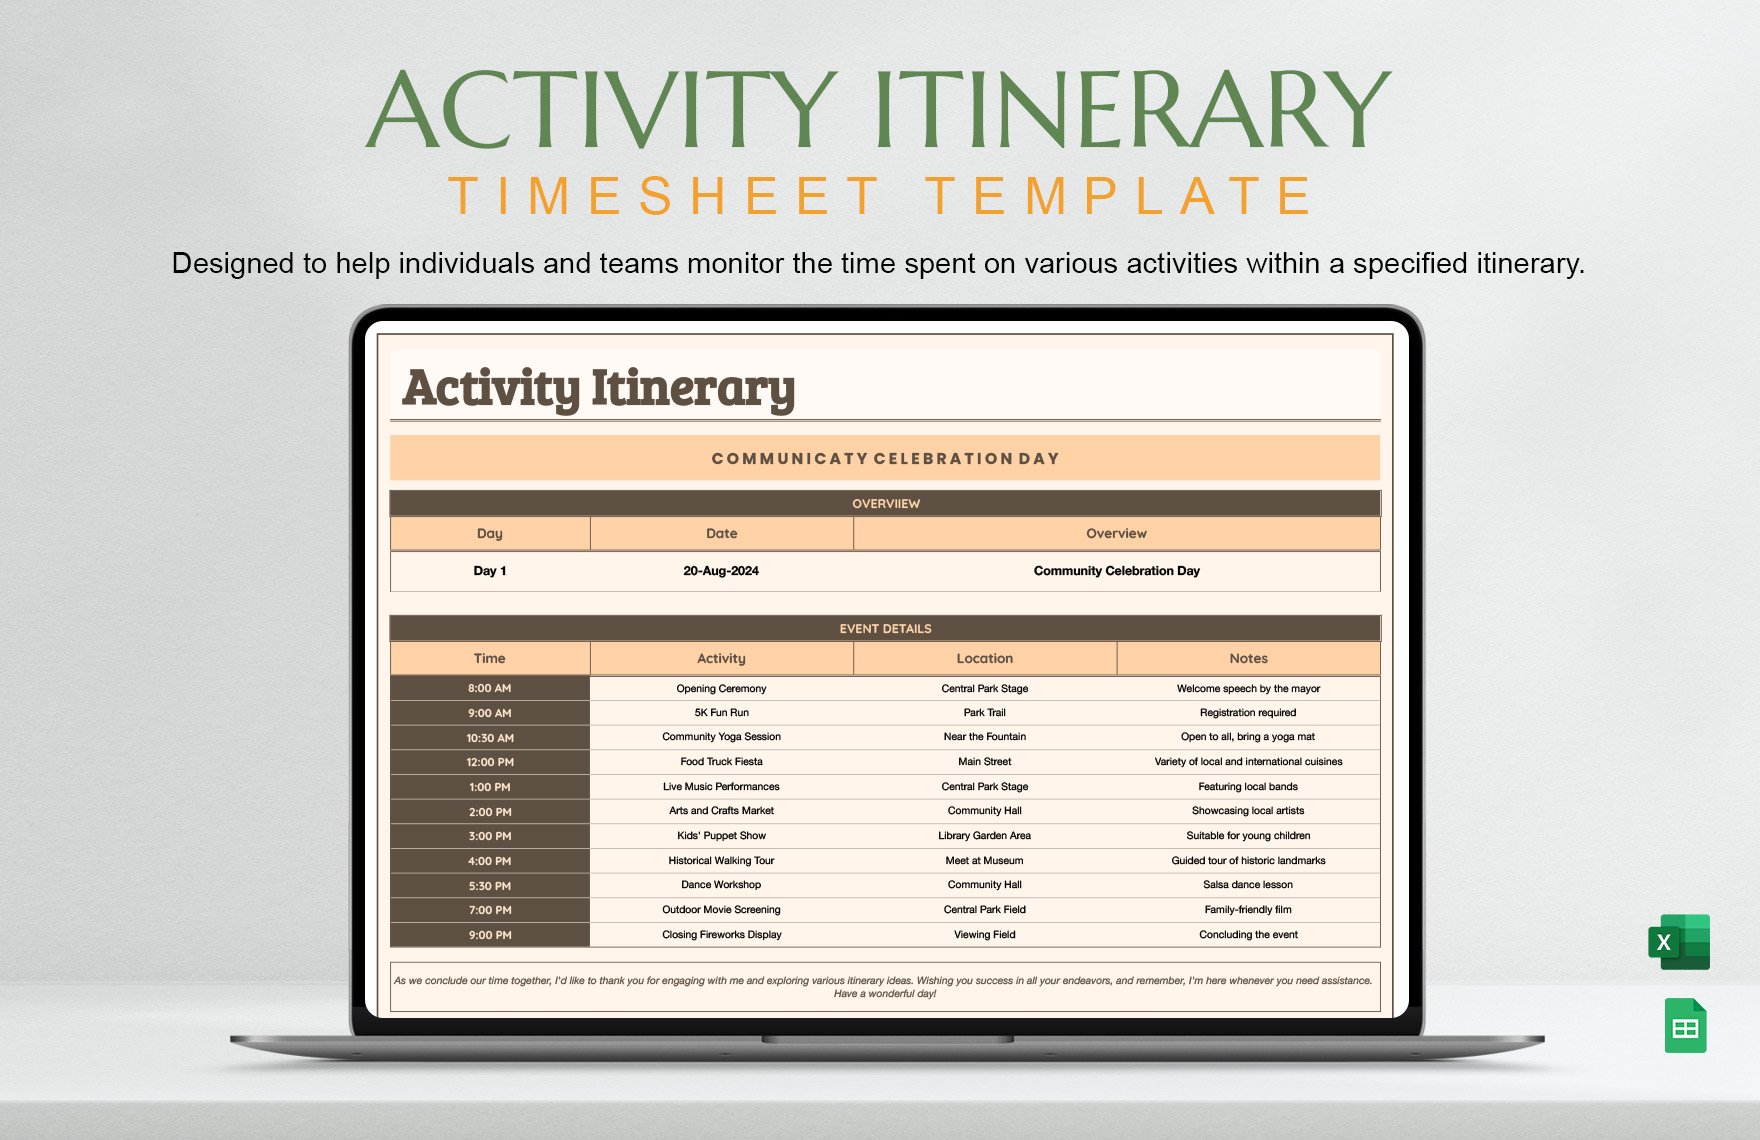 Free Activity Itinerary Template